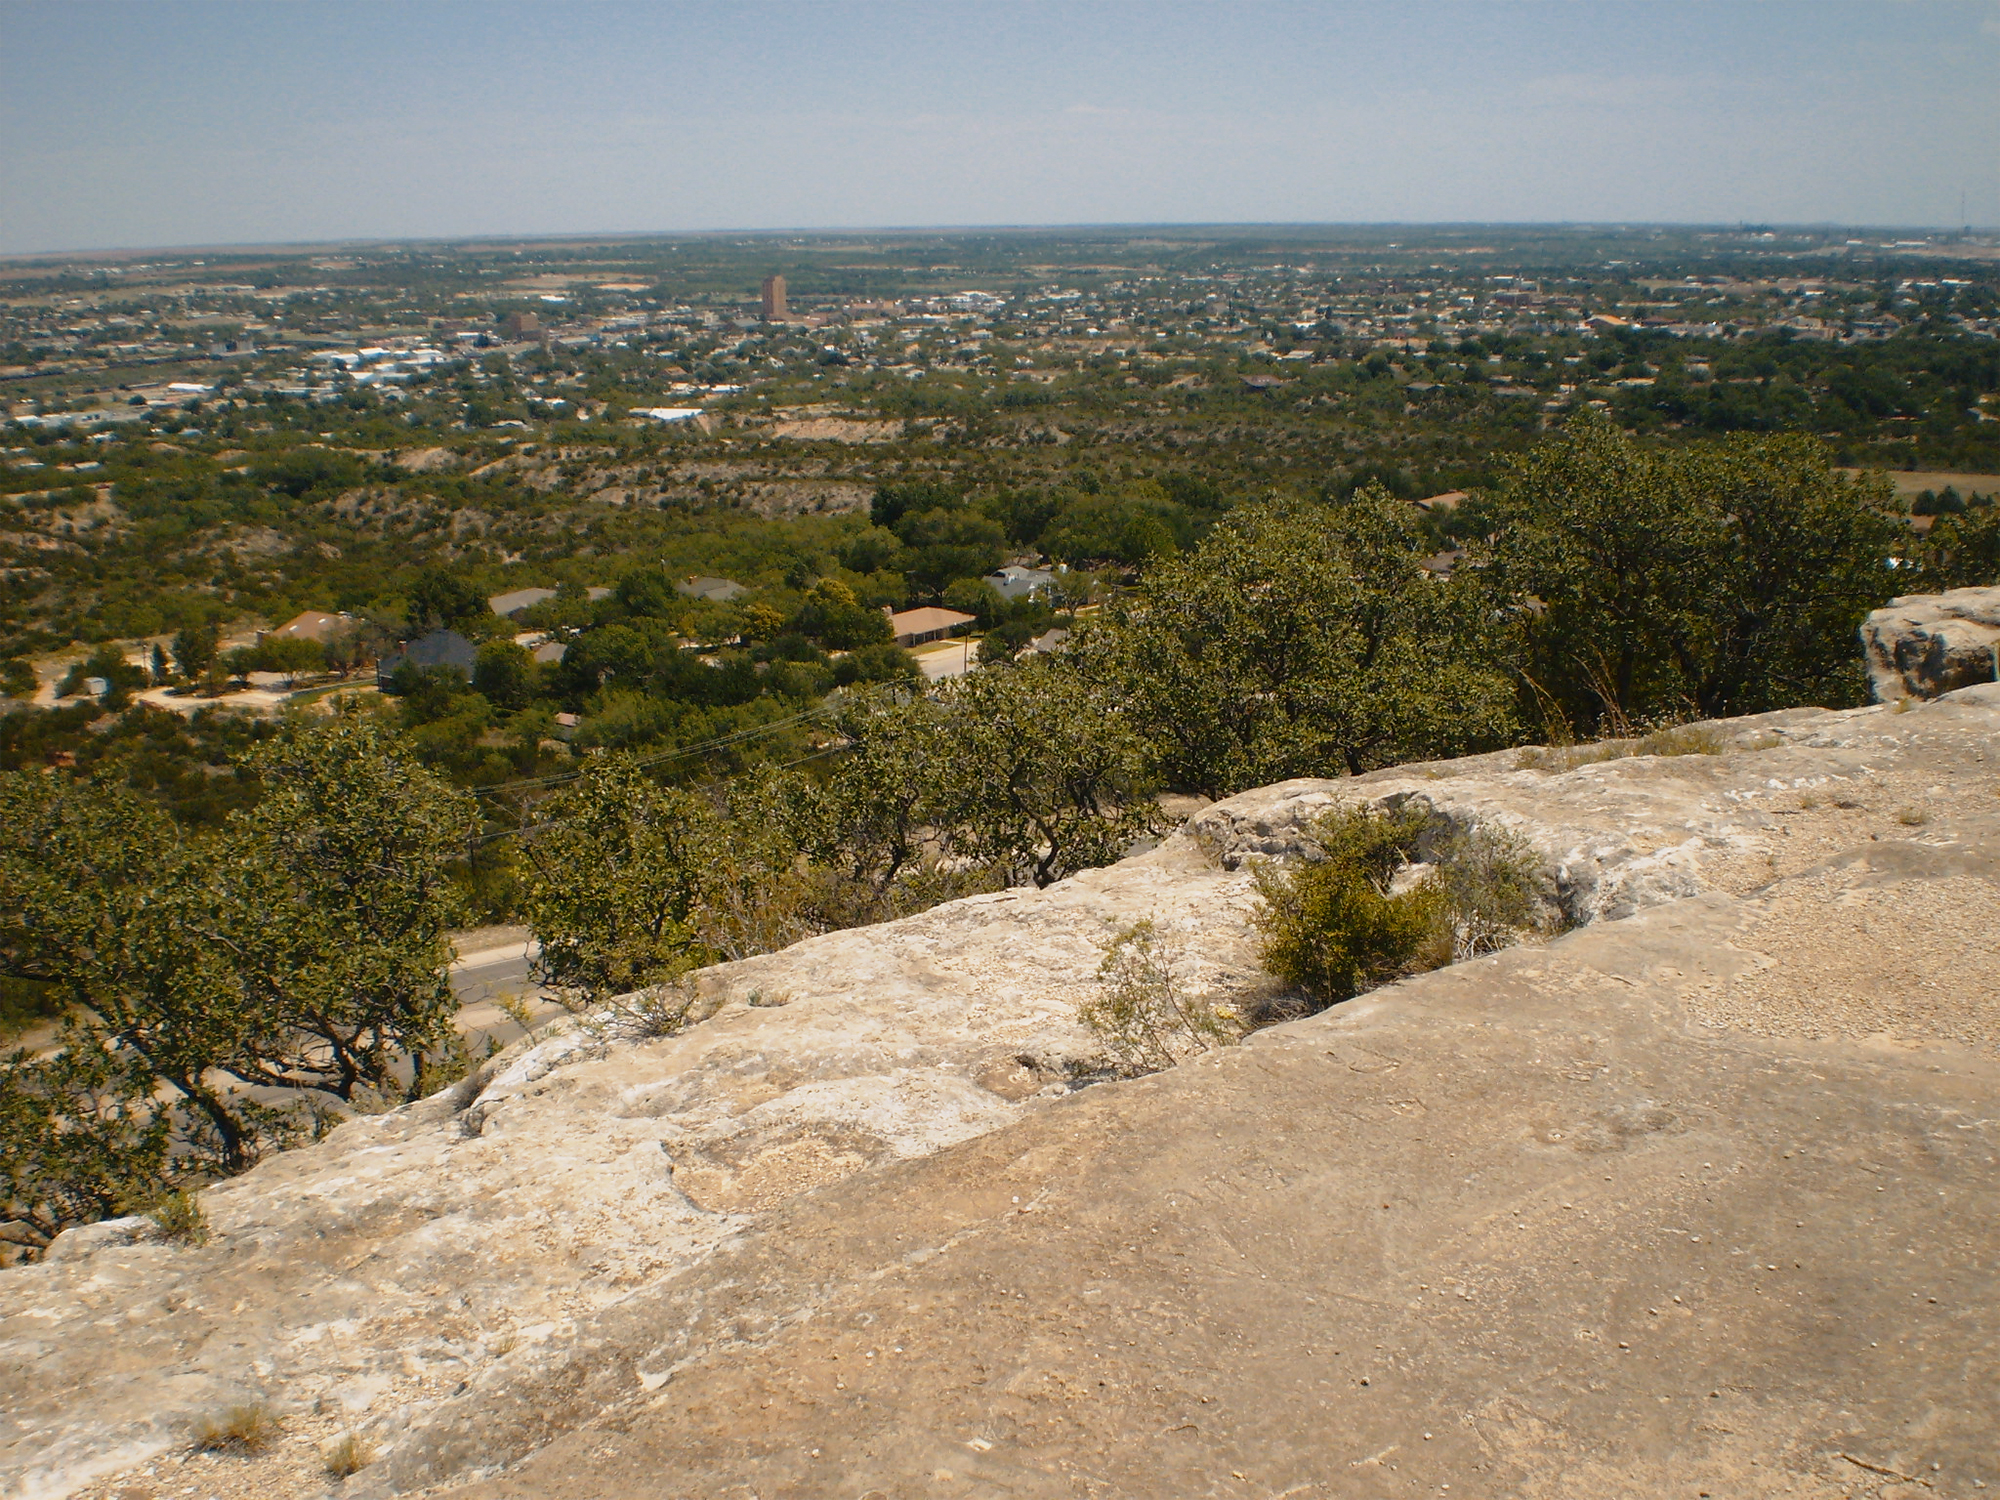 View of Big Spring from Scenic Mountain, western Texas Johannes Loubser Rock Art Network Archaeology Bradshaw Foundation